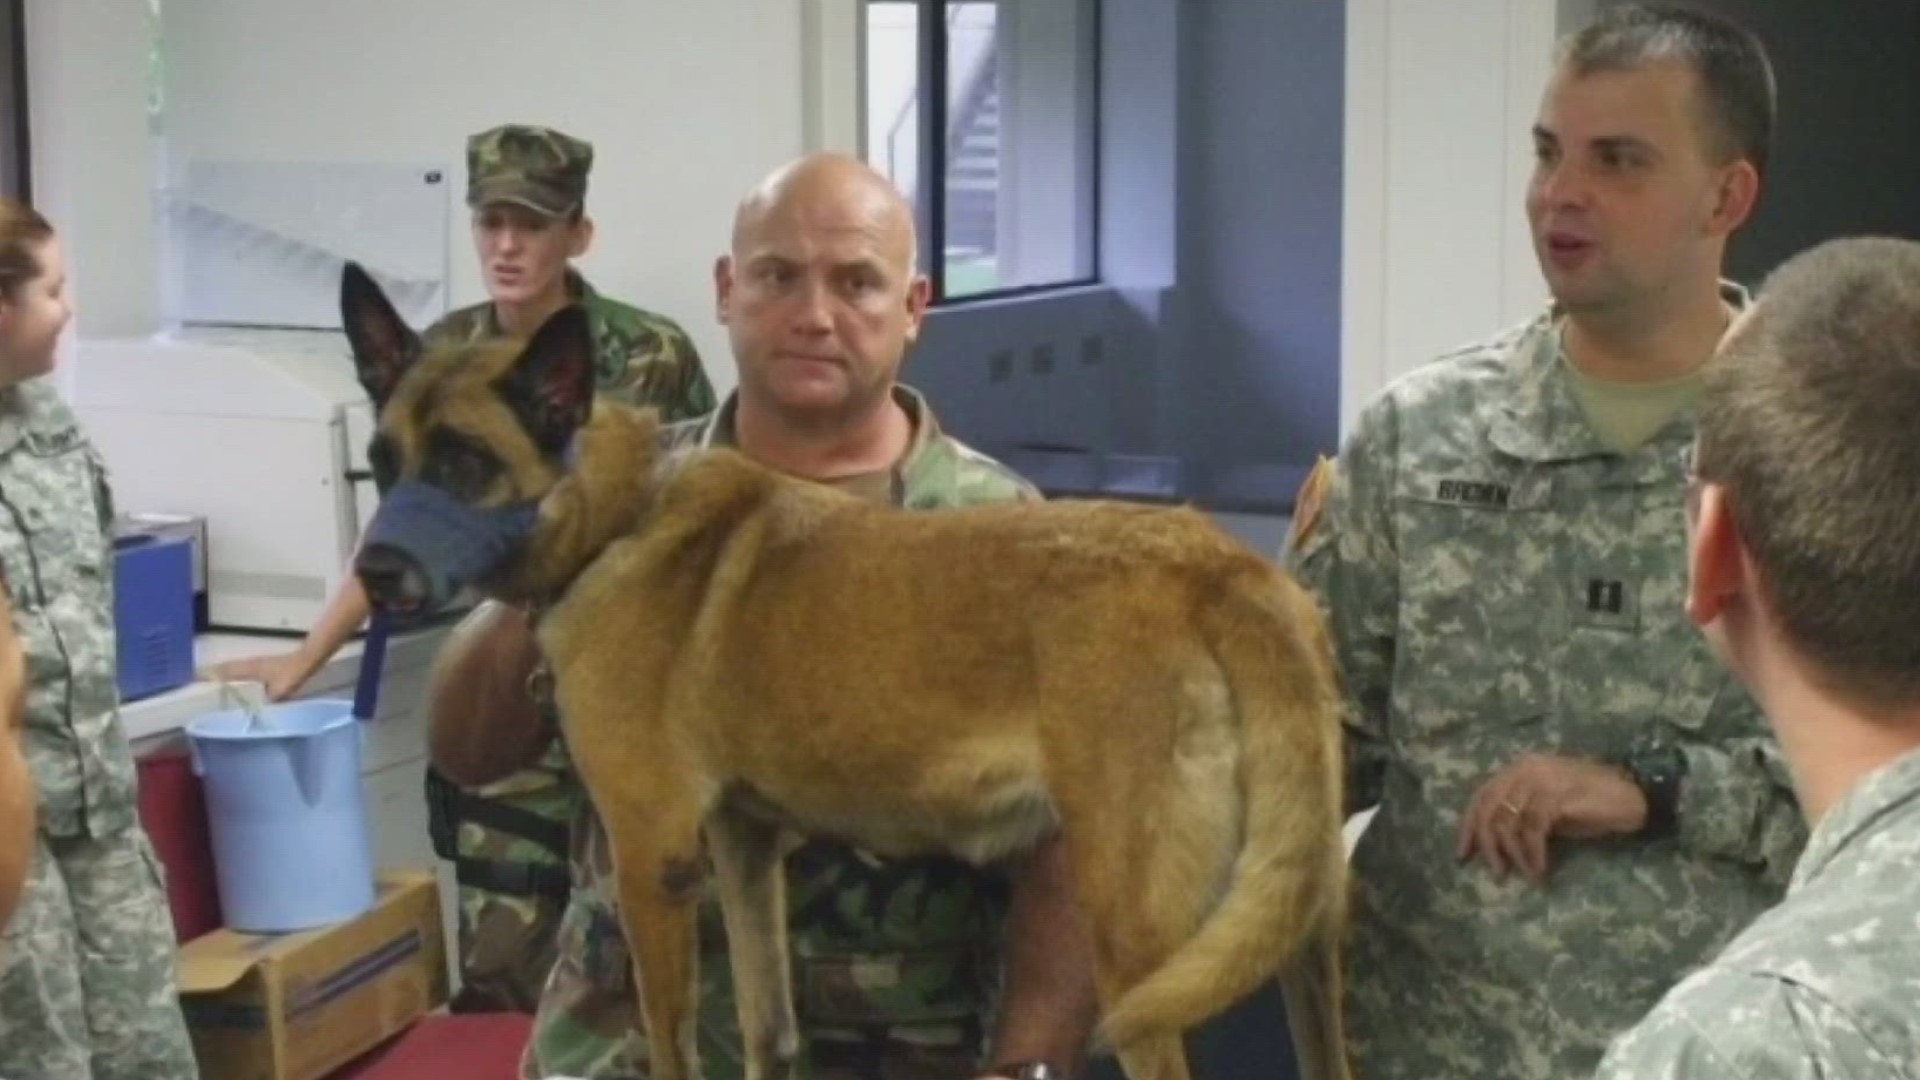 A small community veterinarian in East Tennessee helped oversee the care of some of America’s most well-trained and trusted soldiers, the dogs of war.